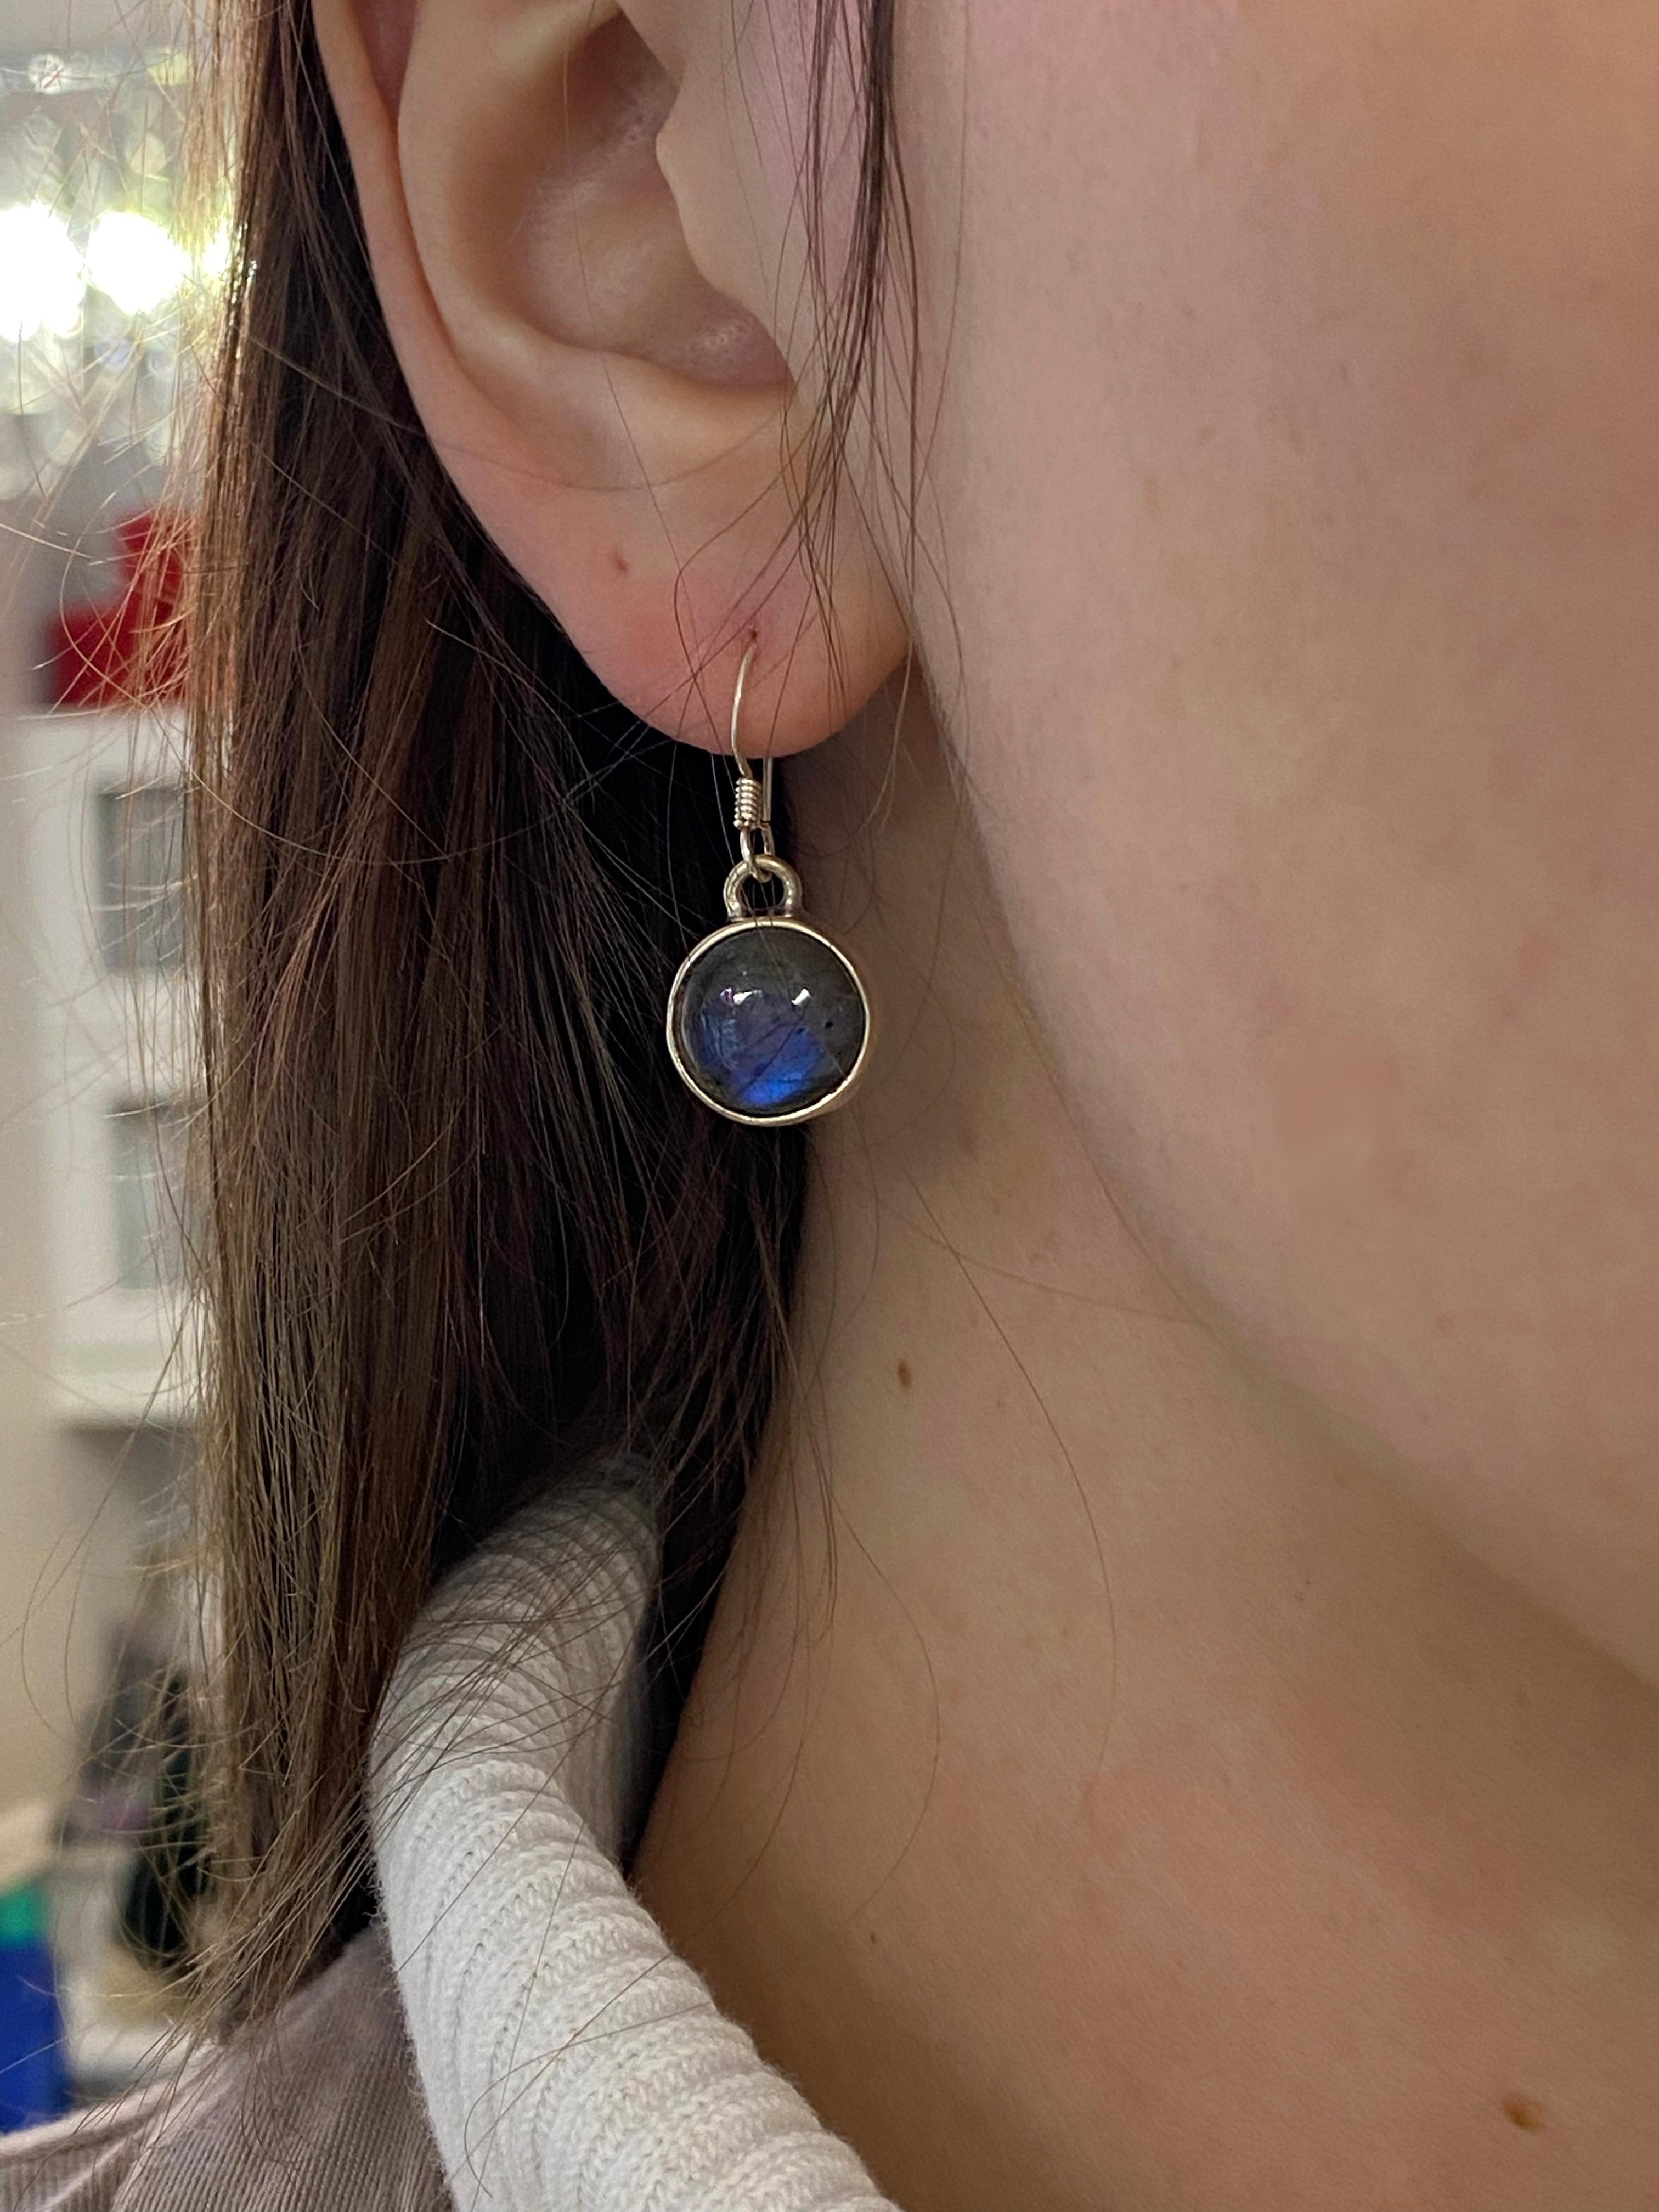 These gorgeous labradorite earrings make a perfect addition to any jewelry lovers collection! Labradorite is known to have spiritual properties such as protection from the negativity of the world around you. With this pair of earrings you not only